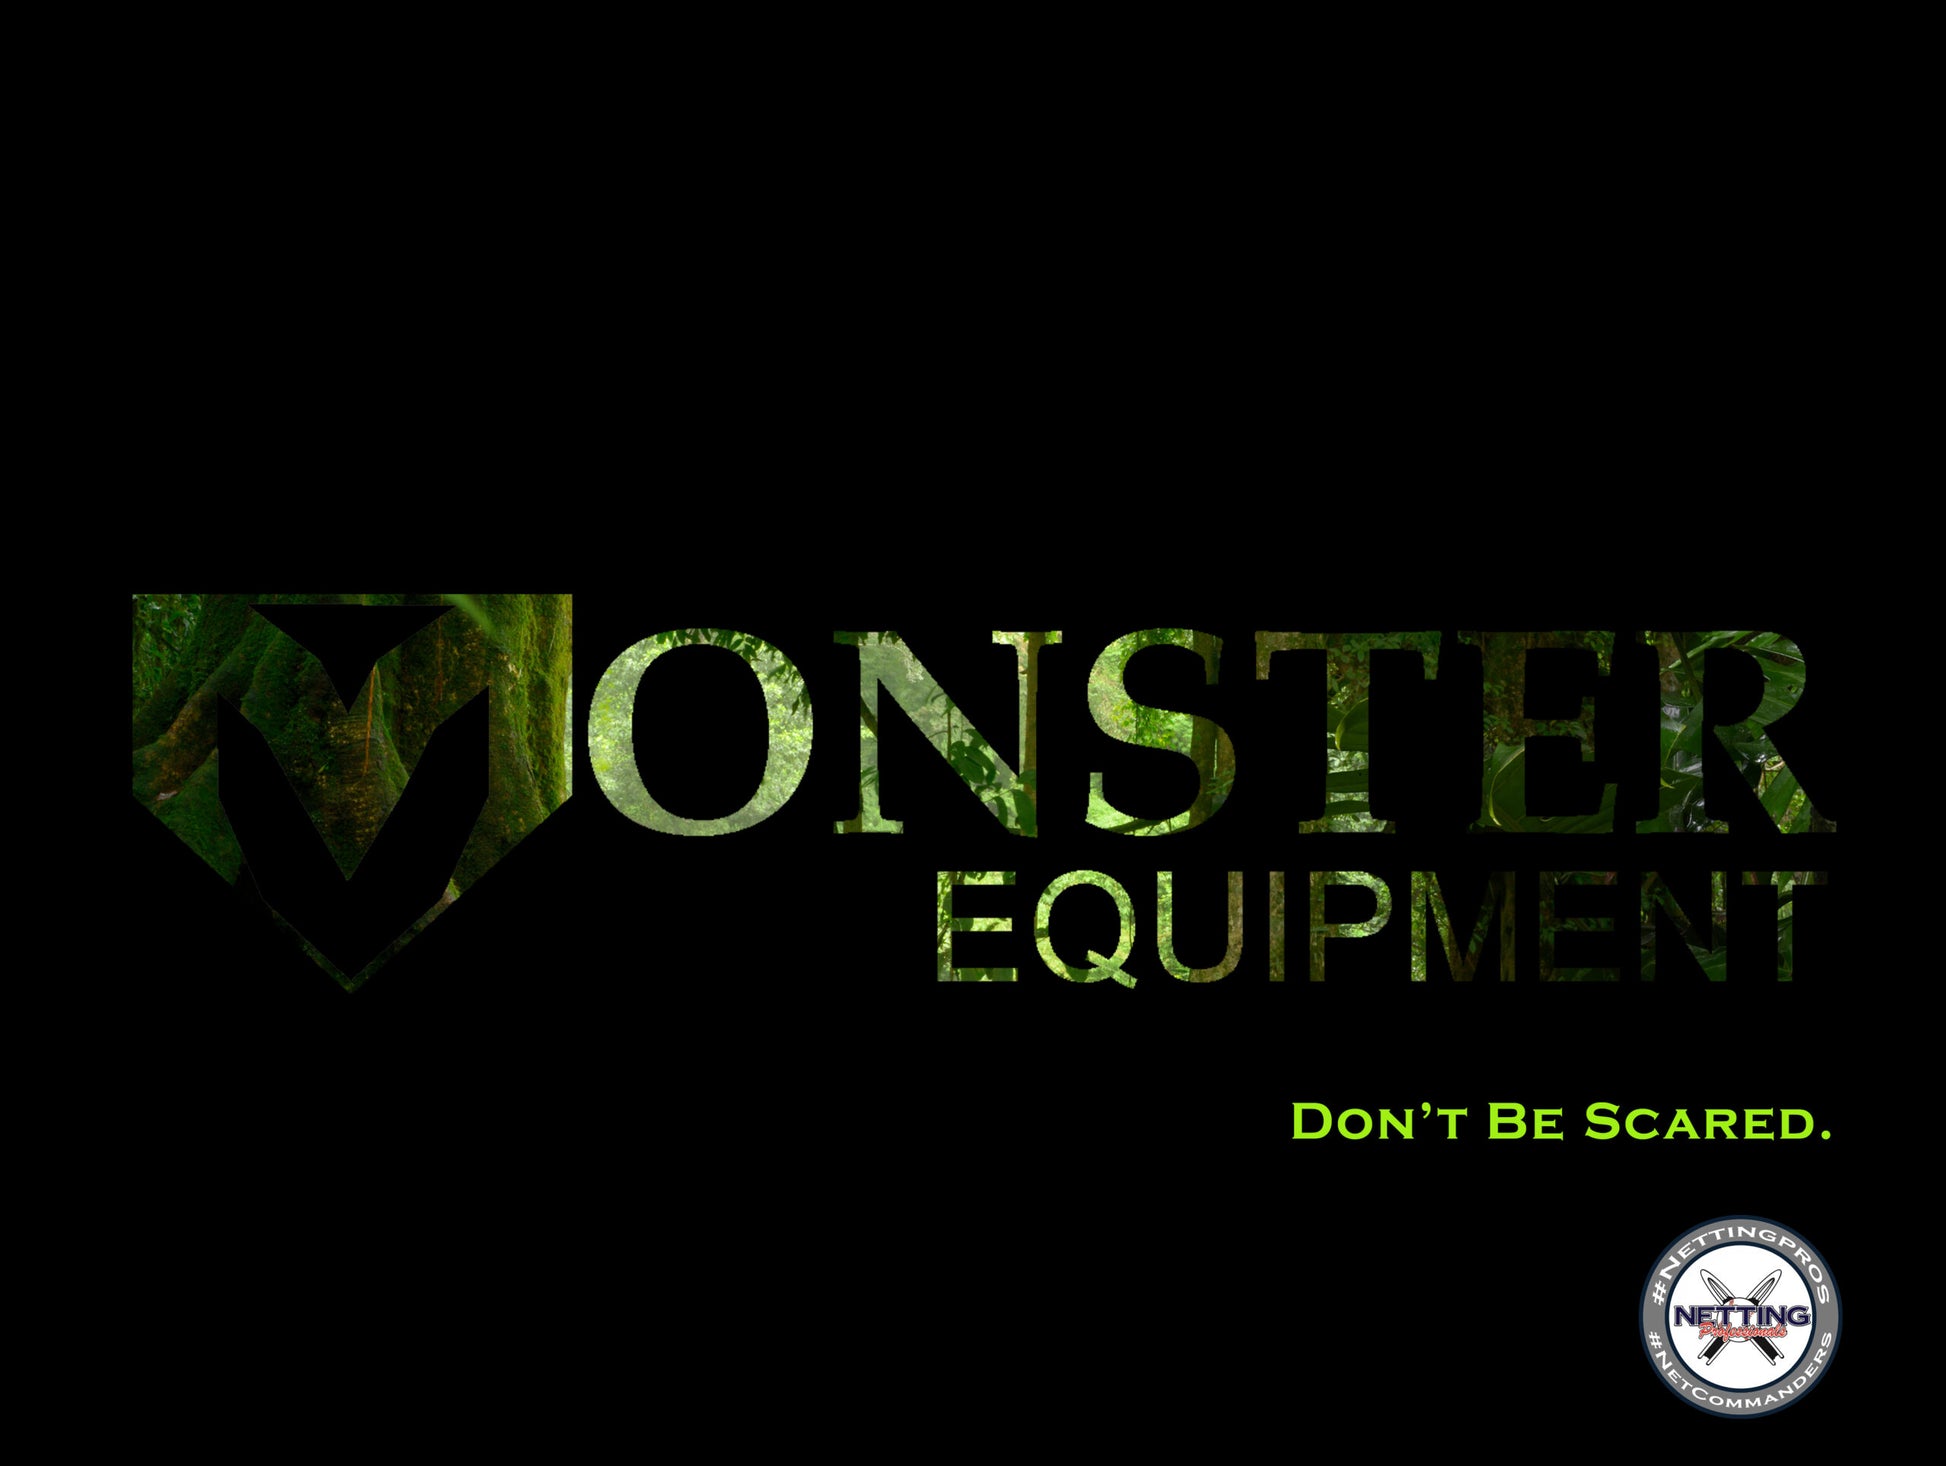 A monster equipment logo is shown in green.